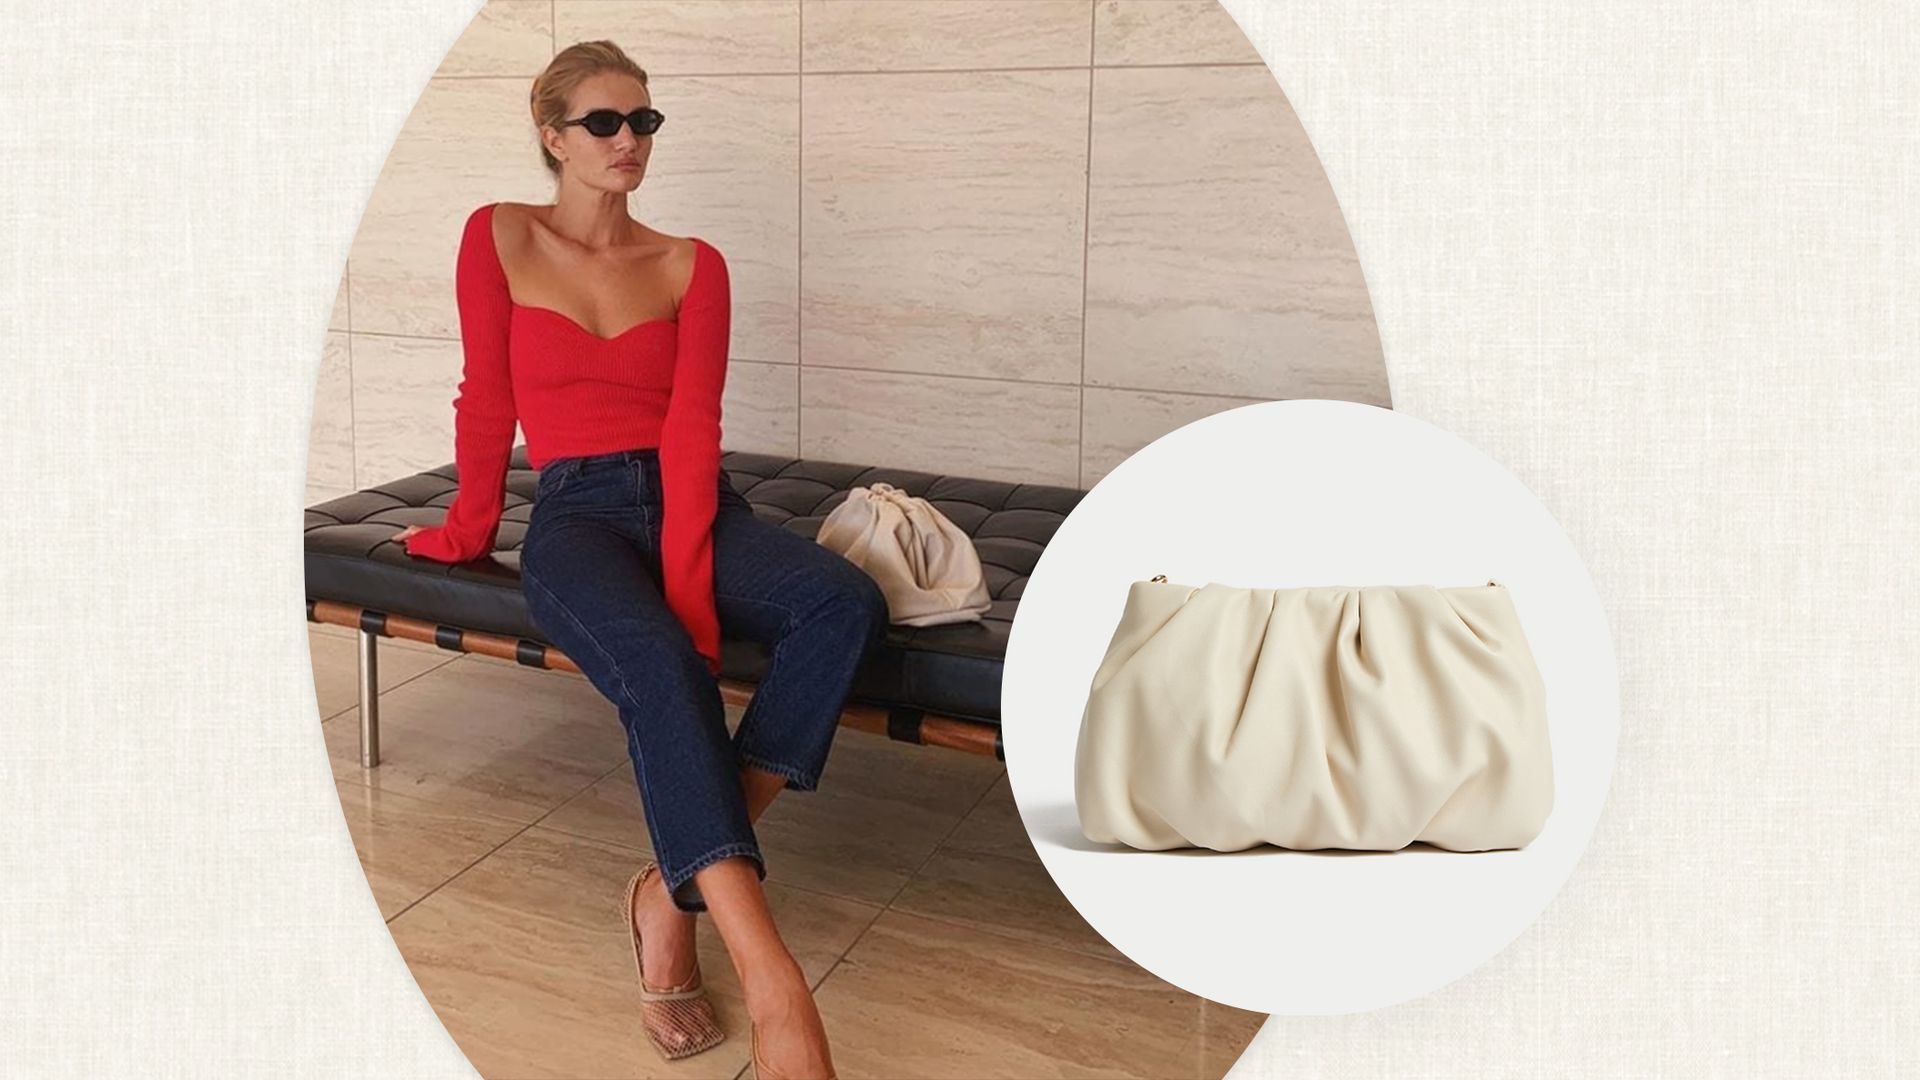 Marks & Spencer's £29 clutch is almost identical to Rosie Huntington-Whiteley's must-have designer bag